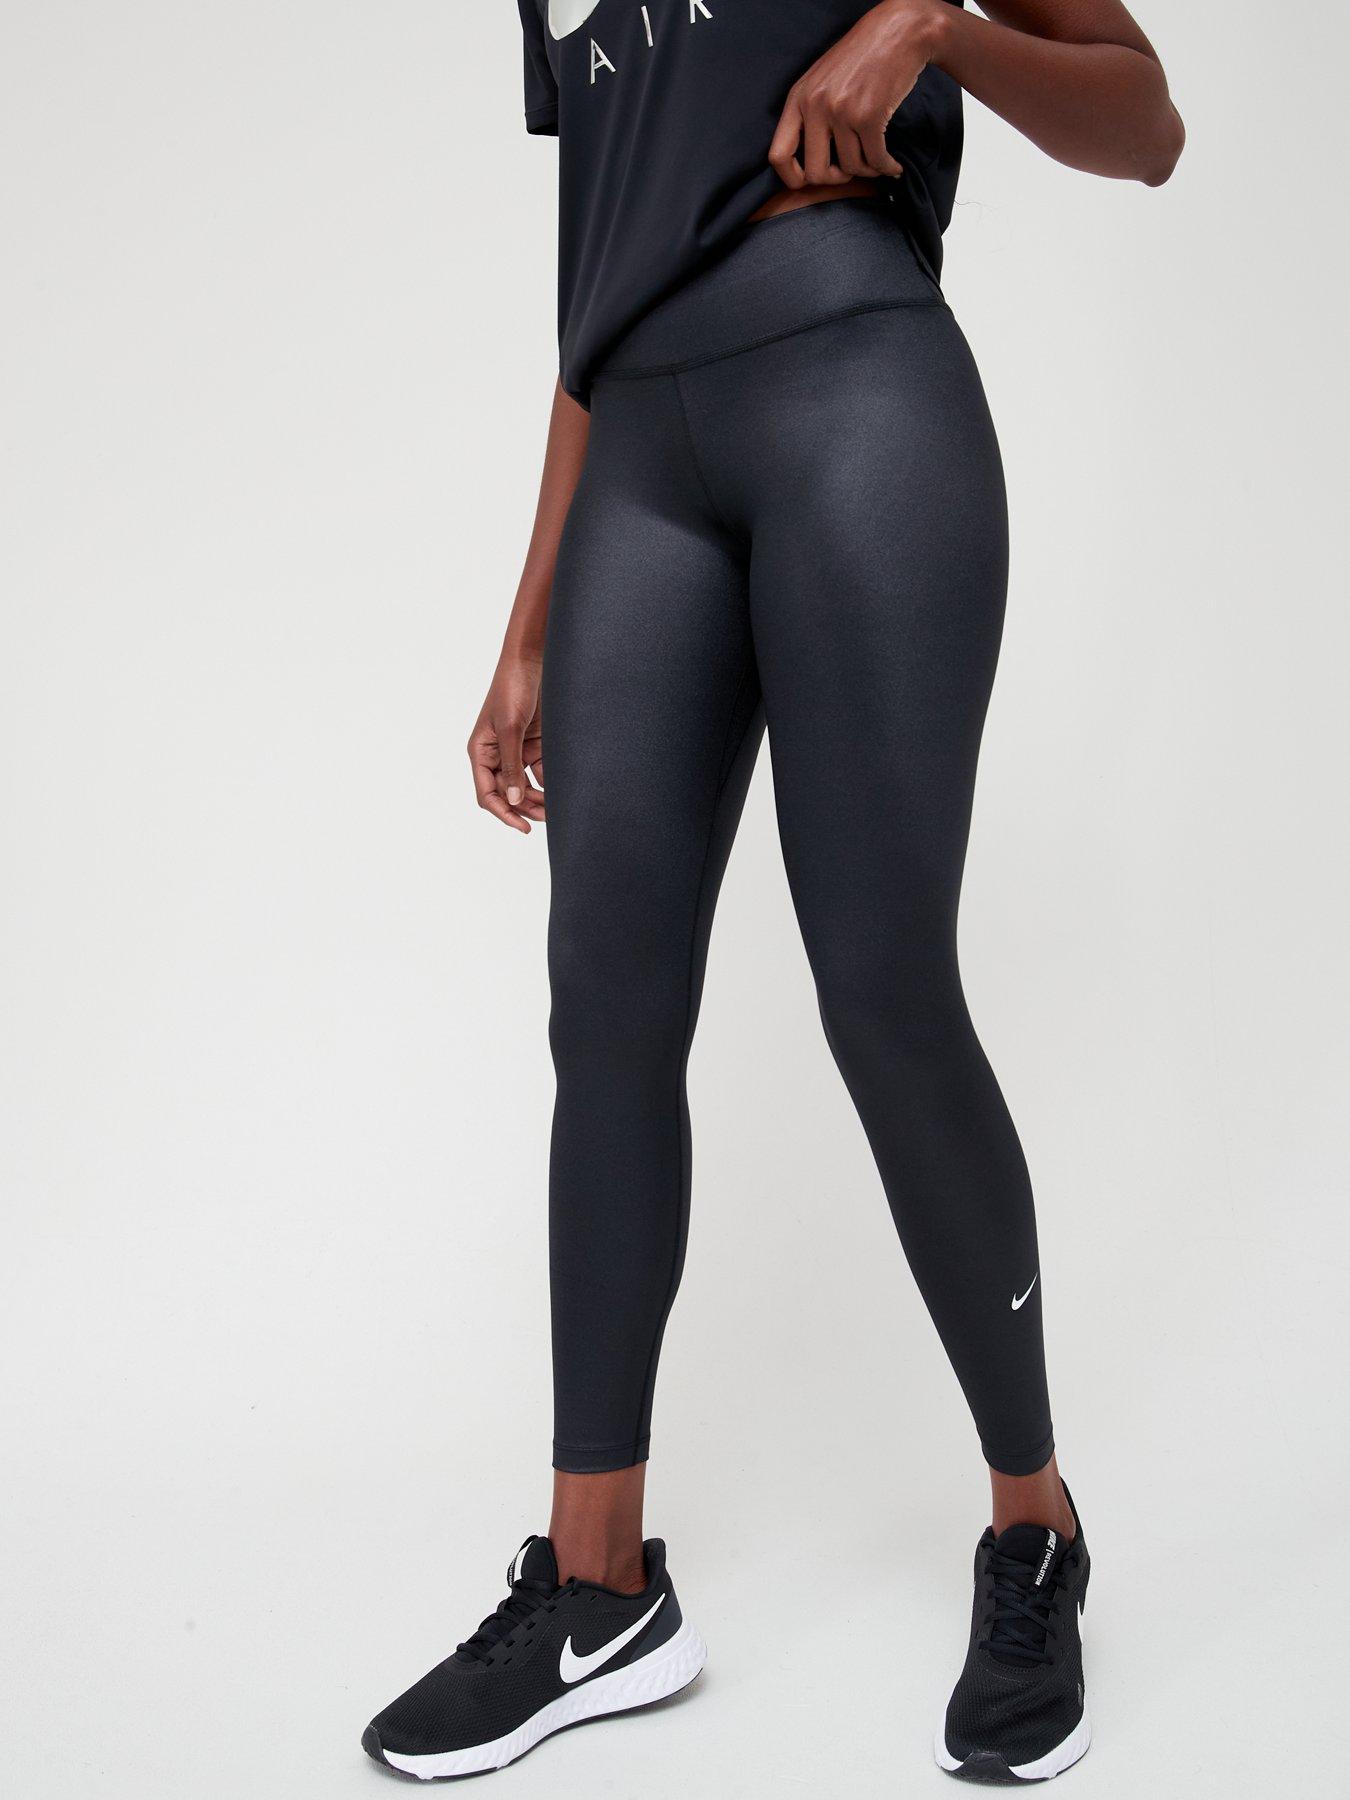 Nike Sparkle Women's Training Running Tights 7/8 Mid Rise Tight Fit